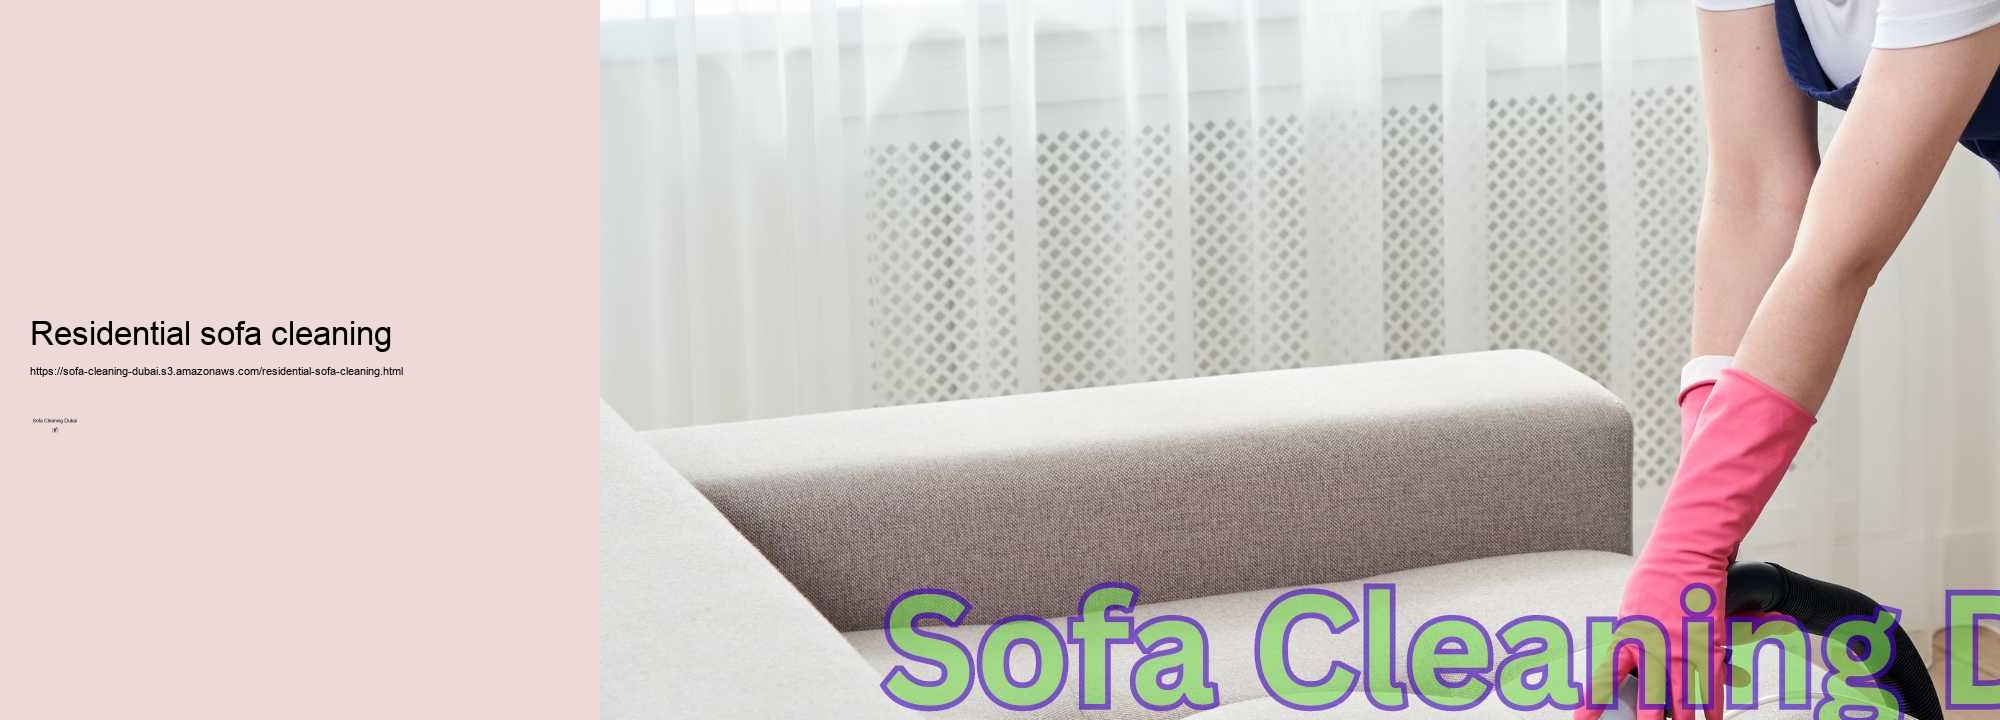 Residential sofa cleaning